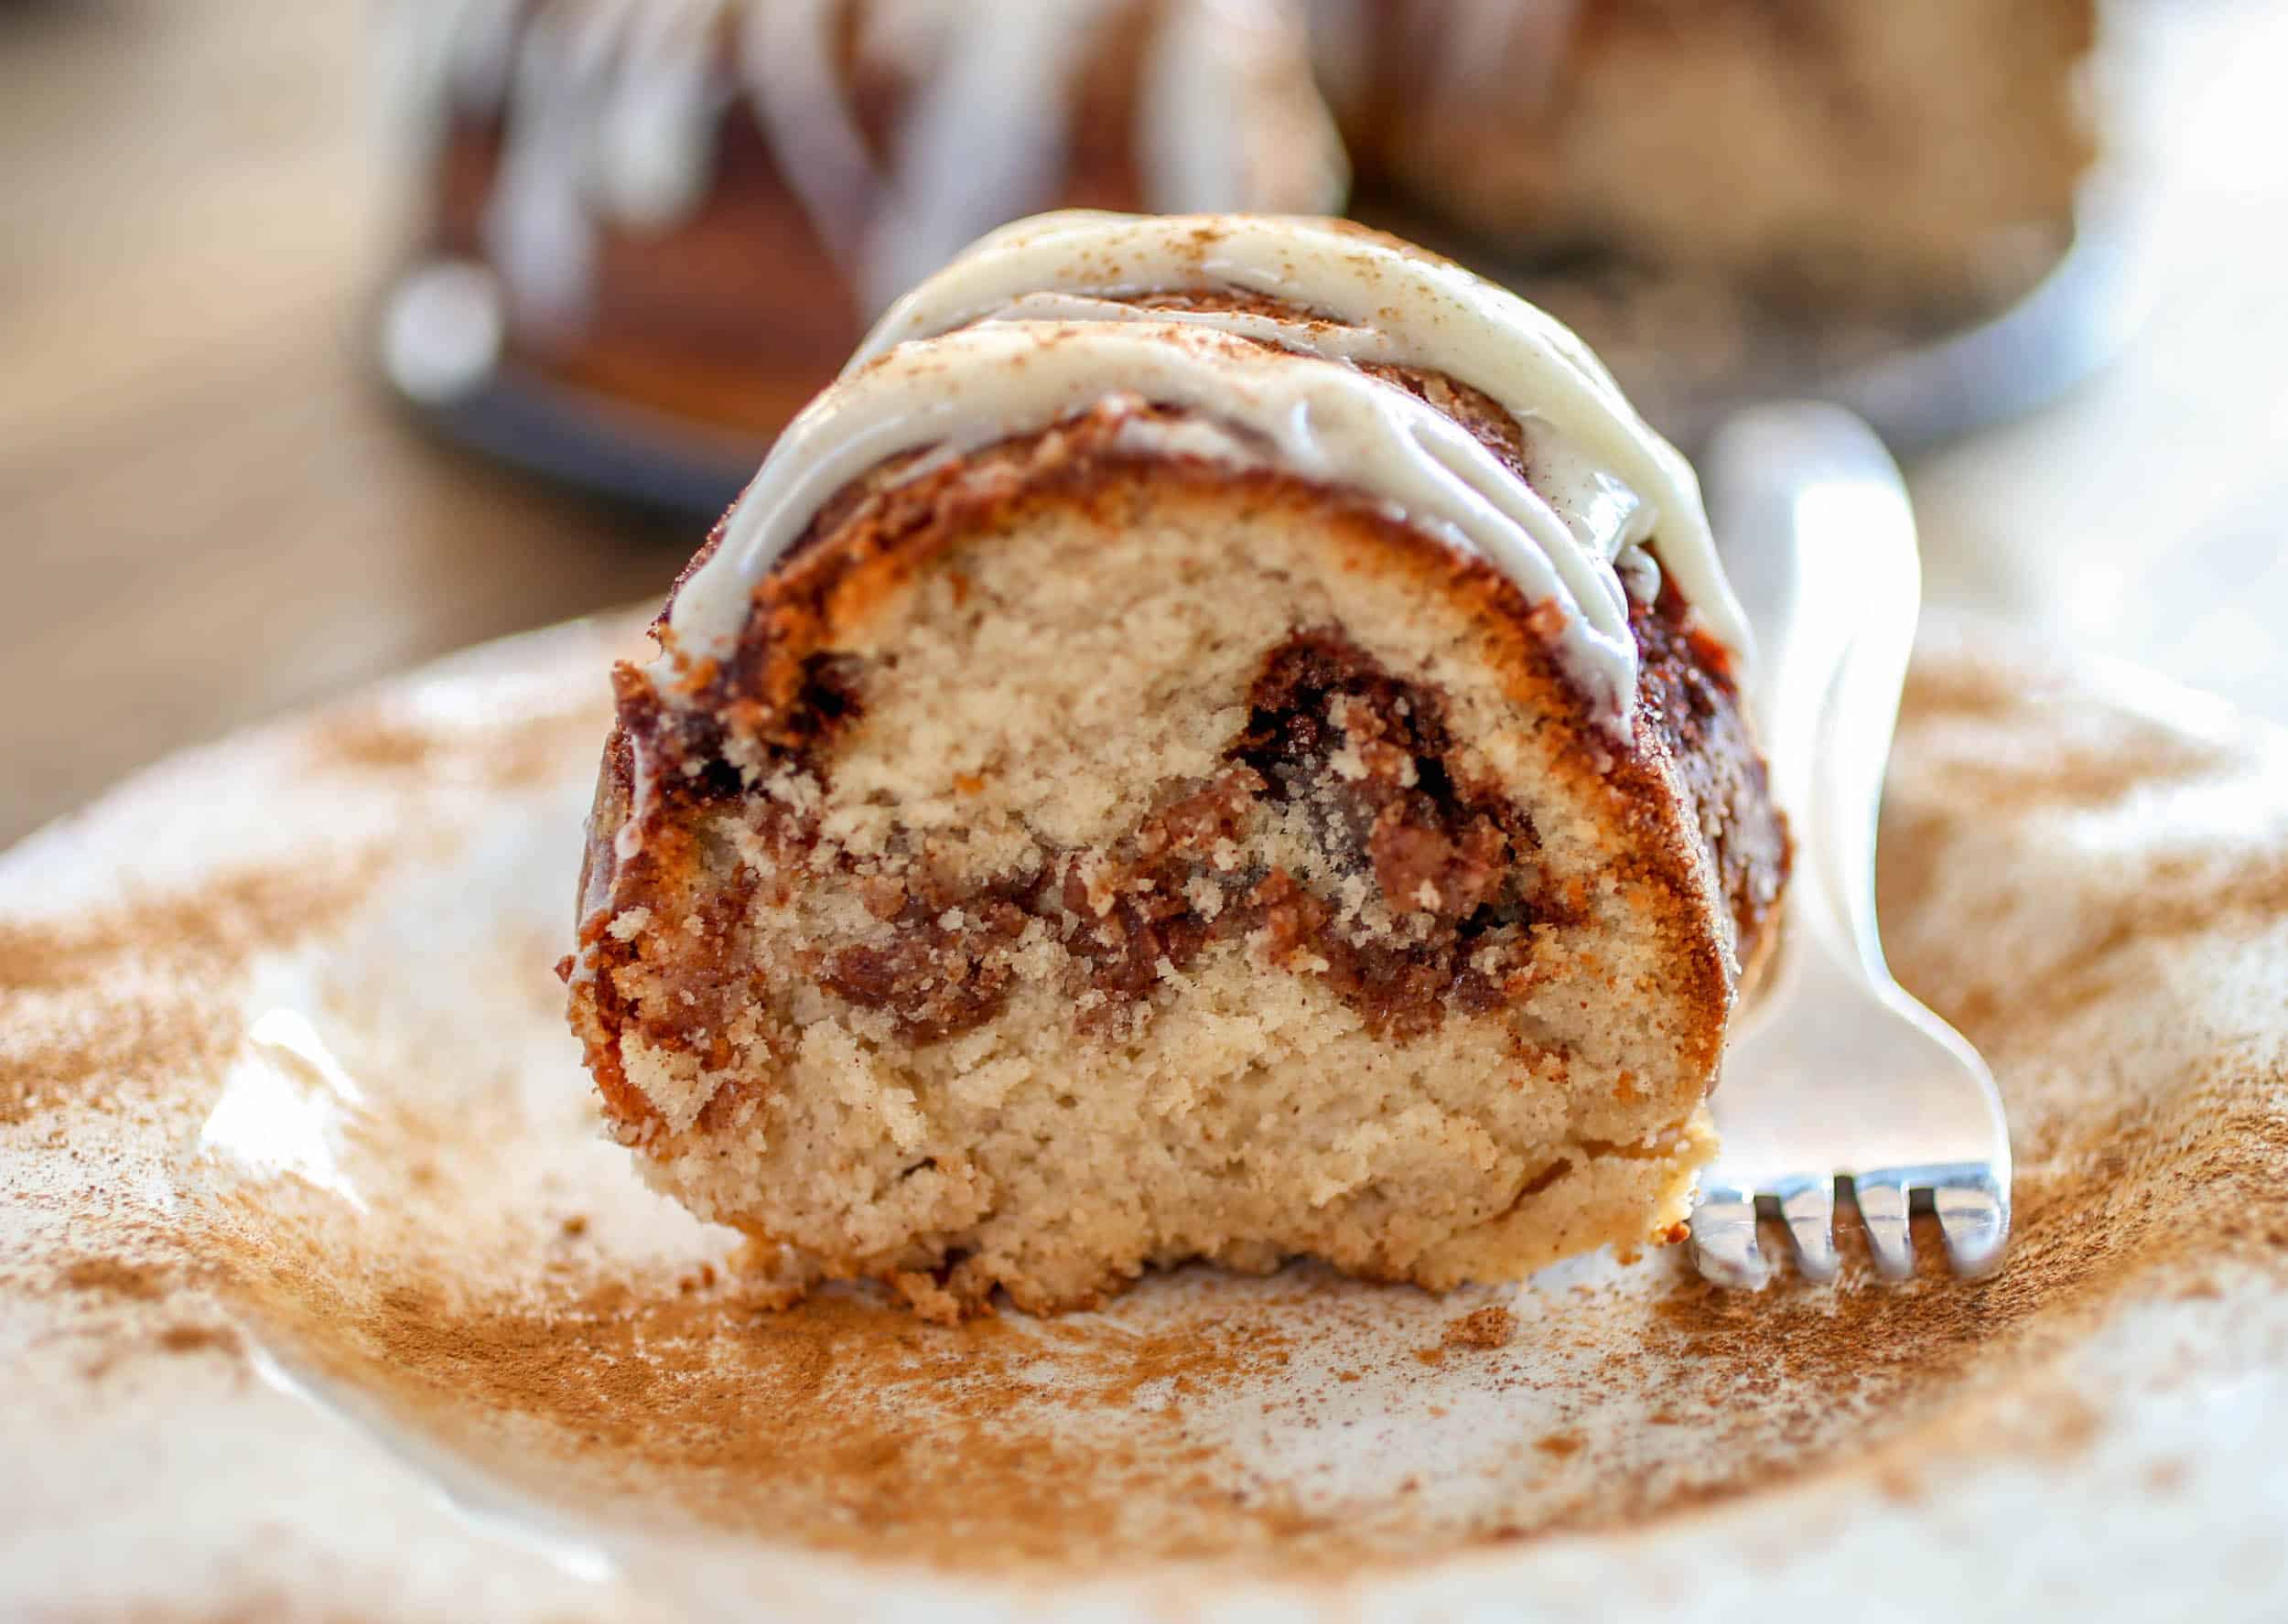 Cinnamon Roll Bundt Cake - From the gooey cinnamon swirl, to the iconic cream cheese icing on top, this Cinnamon Roll Bundt Cake is perfection for cinnamon roll lovers.